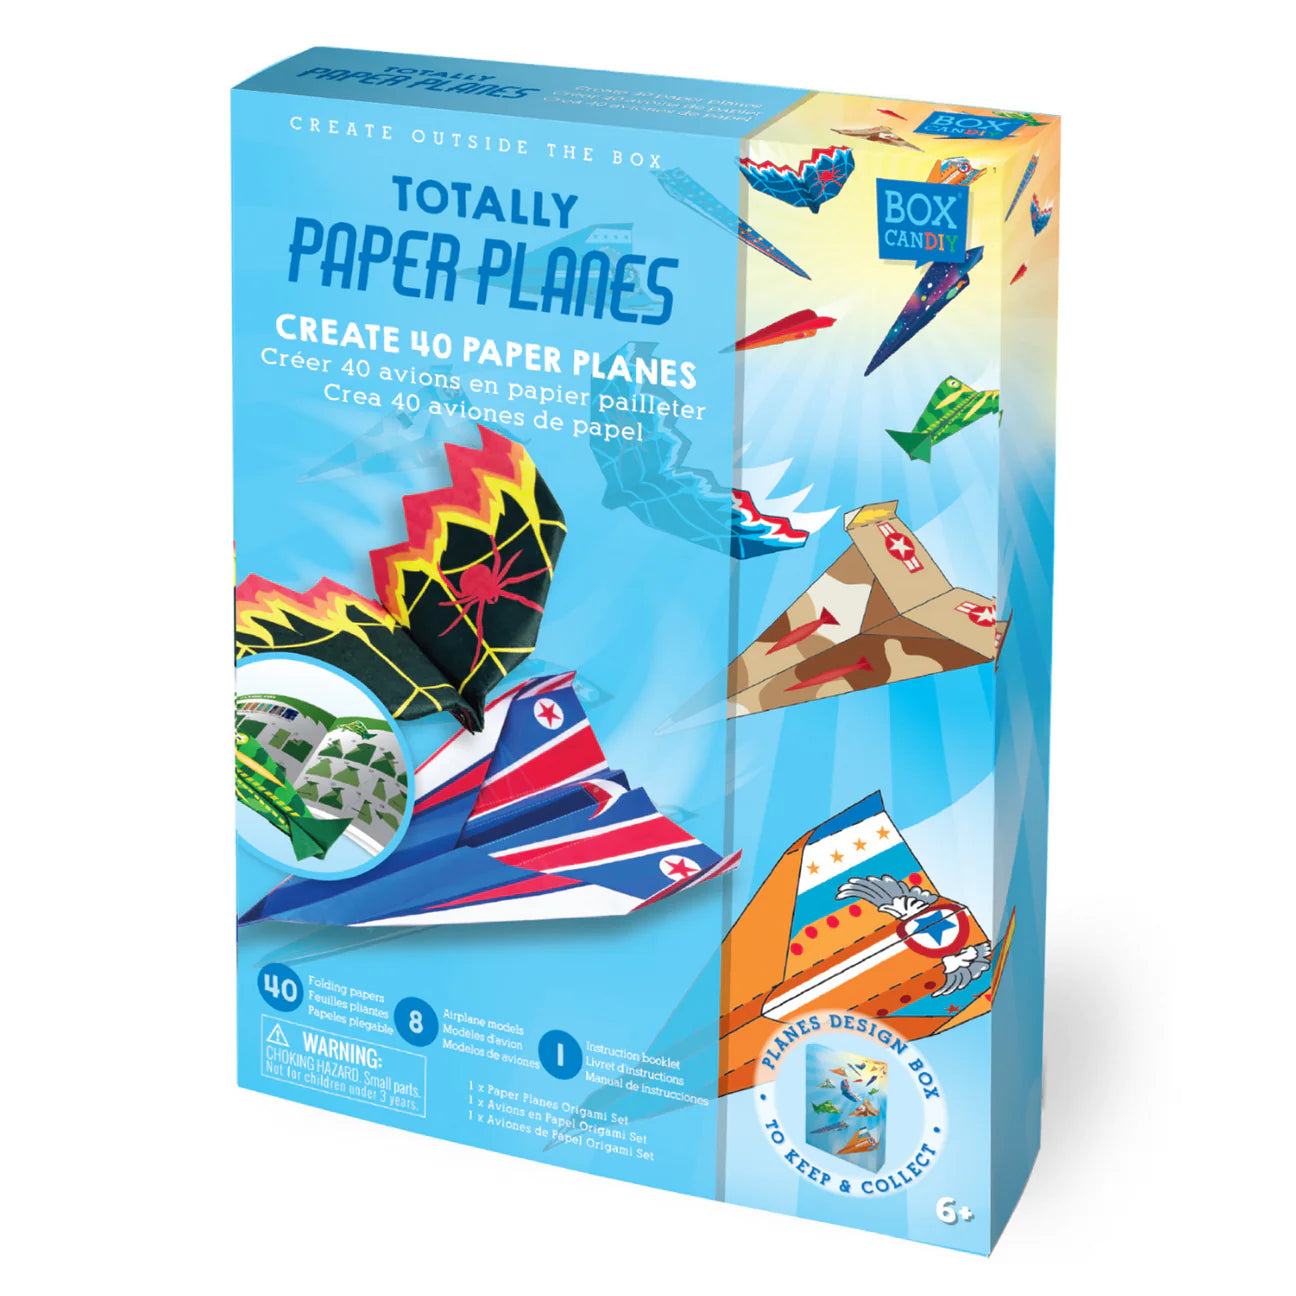 Paper Planes Origami Set by Box Candiy #BC1915